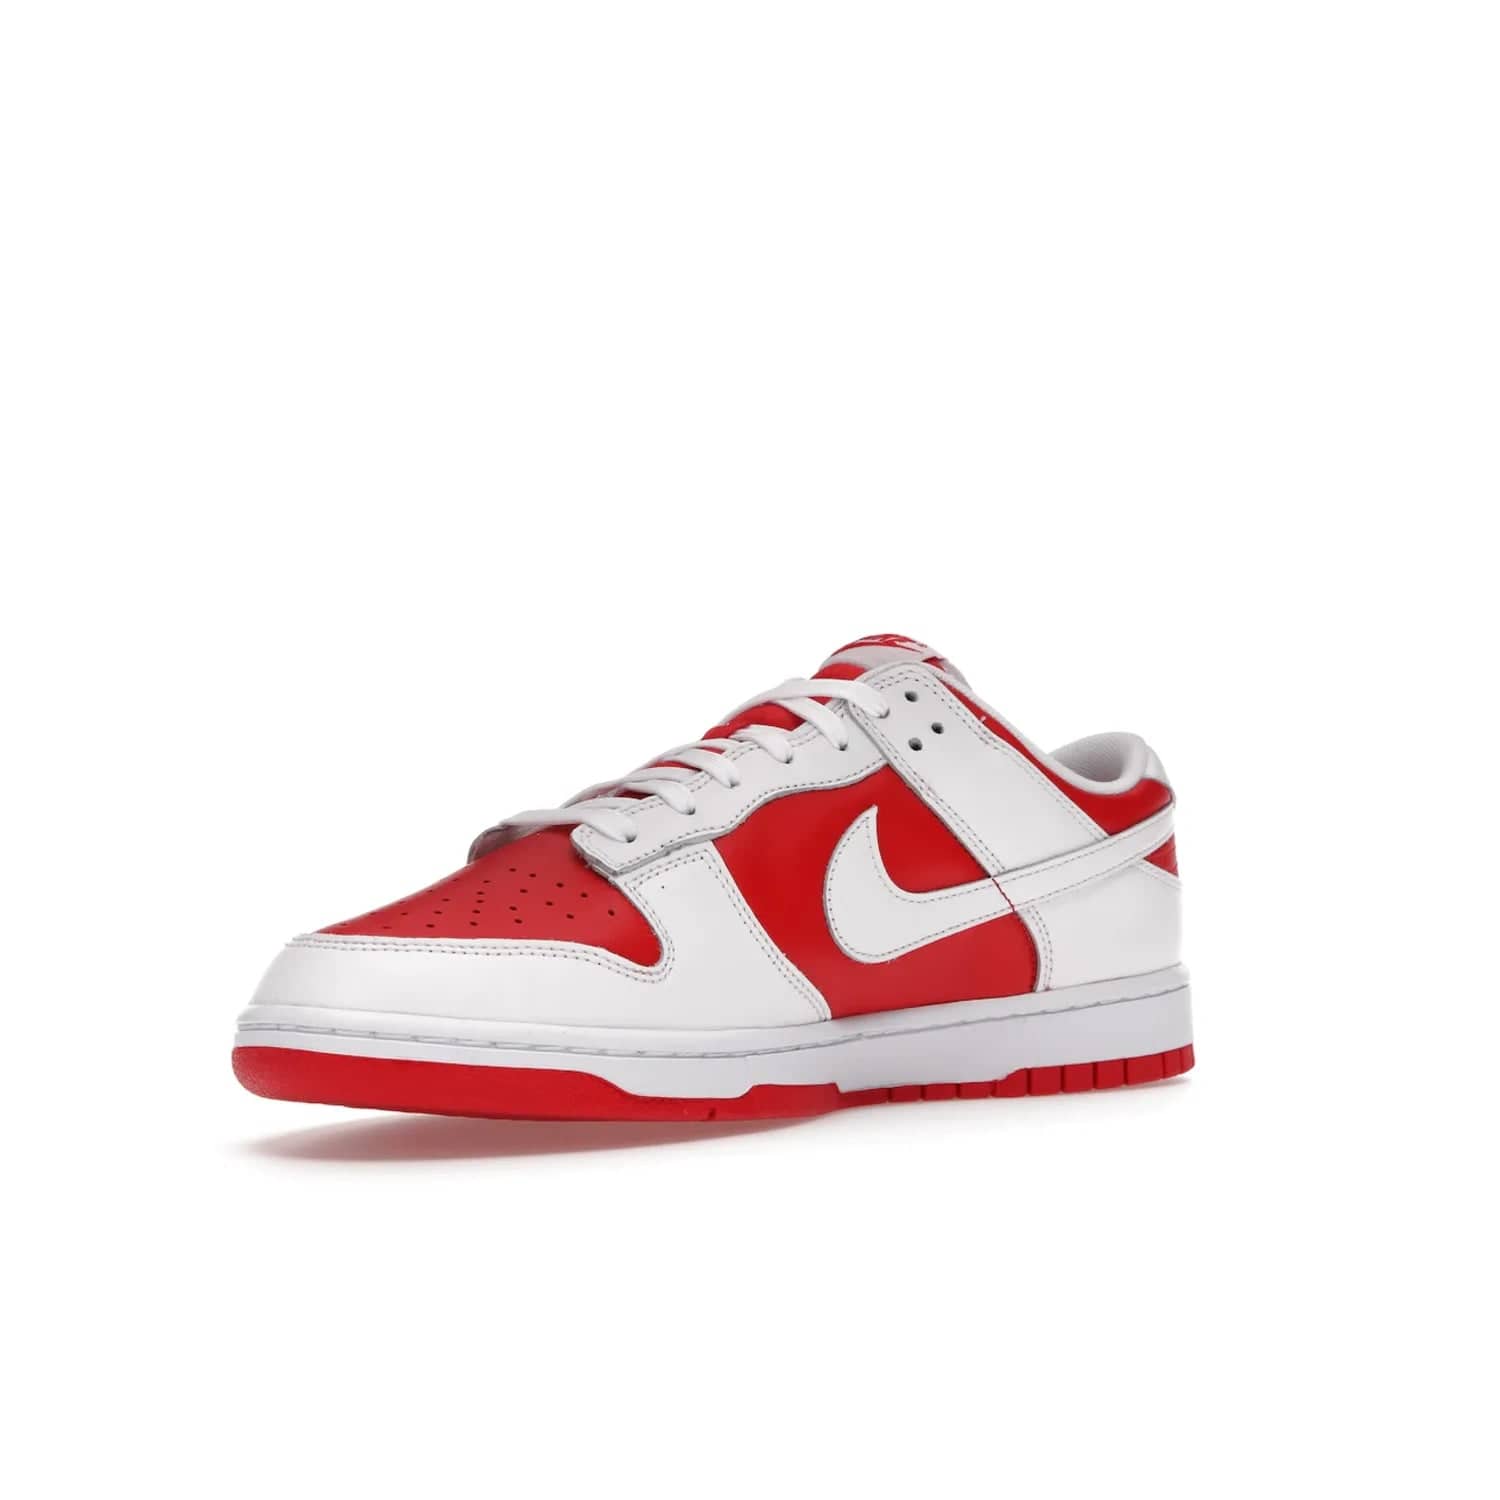 Nike Dunk Low Championship Red (2021) - Image 15 - Only at www.BallersClubKickz.com - A bold and stylish Nike Dunk Low Championship Red from 2021 with a classic retro design. University Red upper, white leather overlays and Swooshes, and a woven tongue label. Make a statement with these sleek kicks!